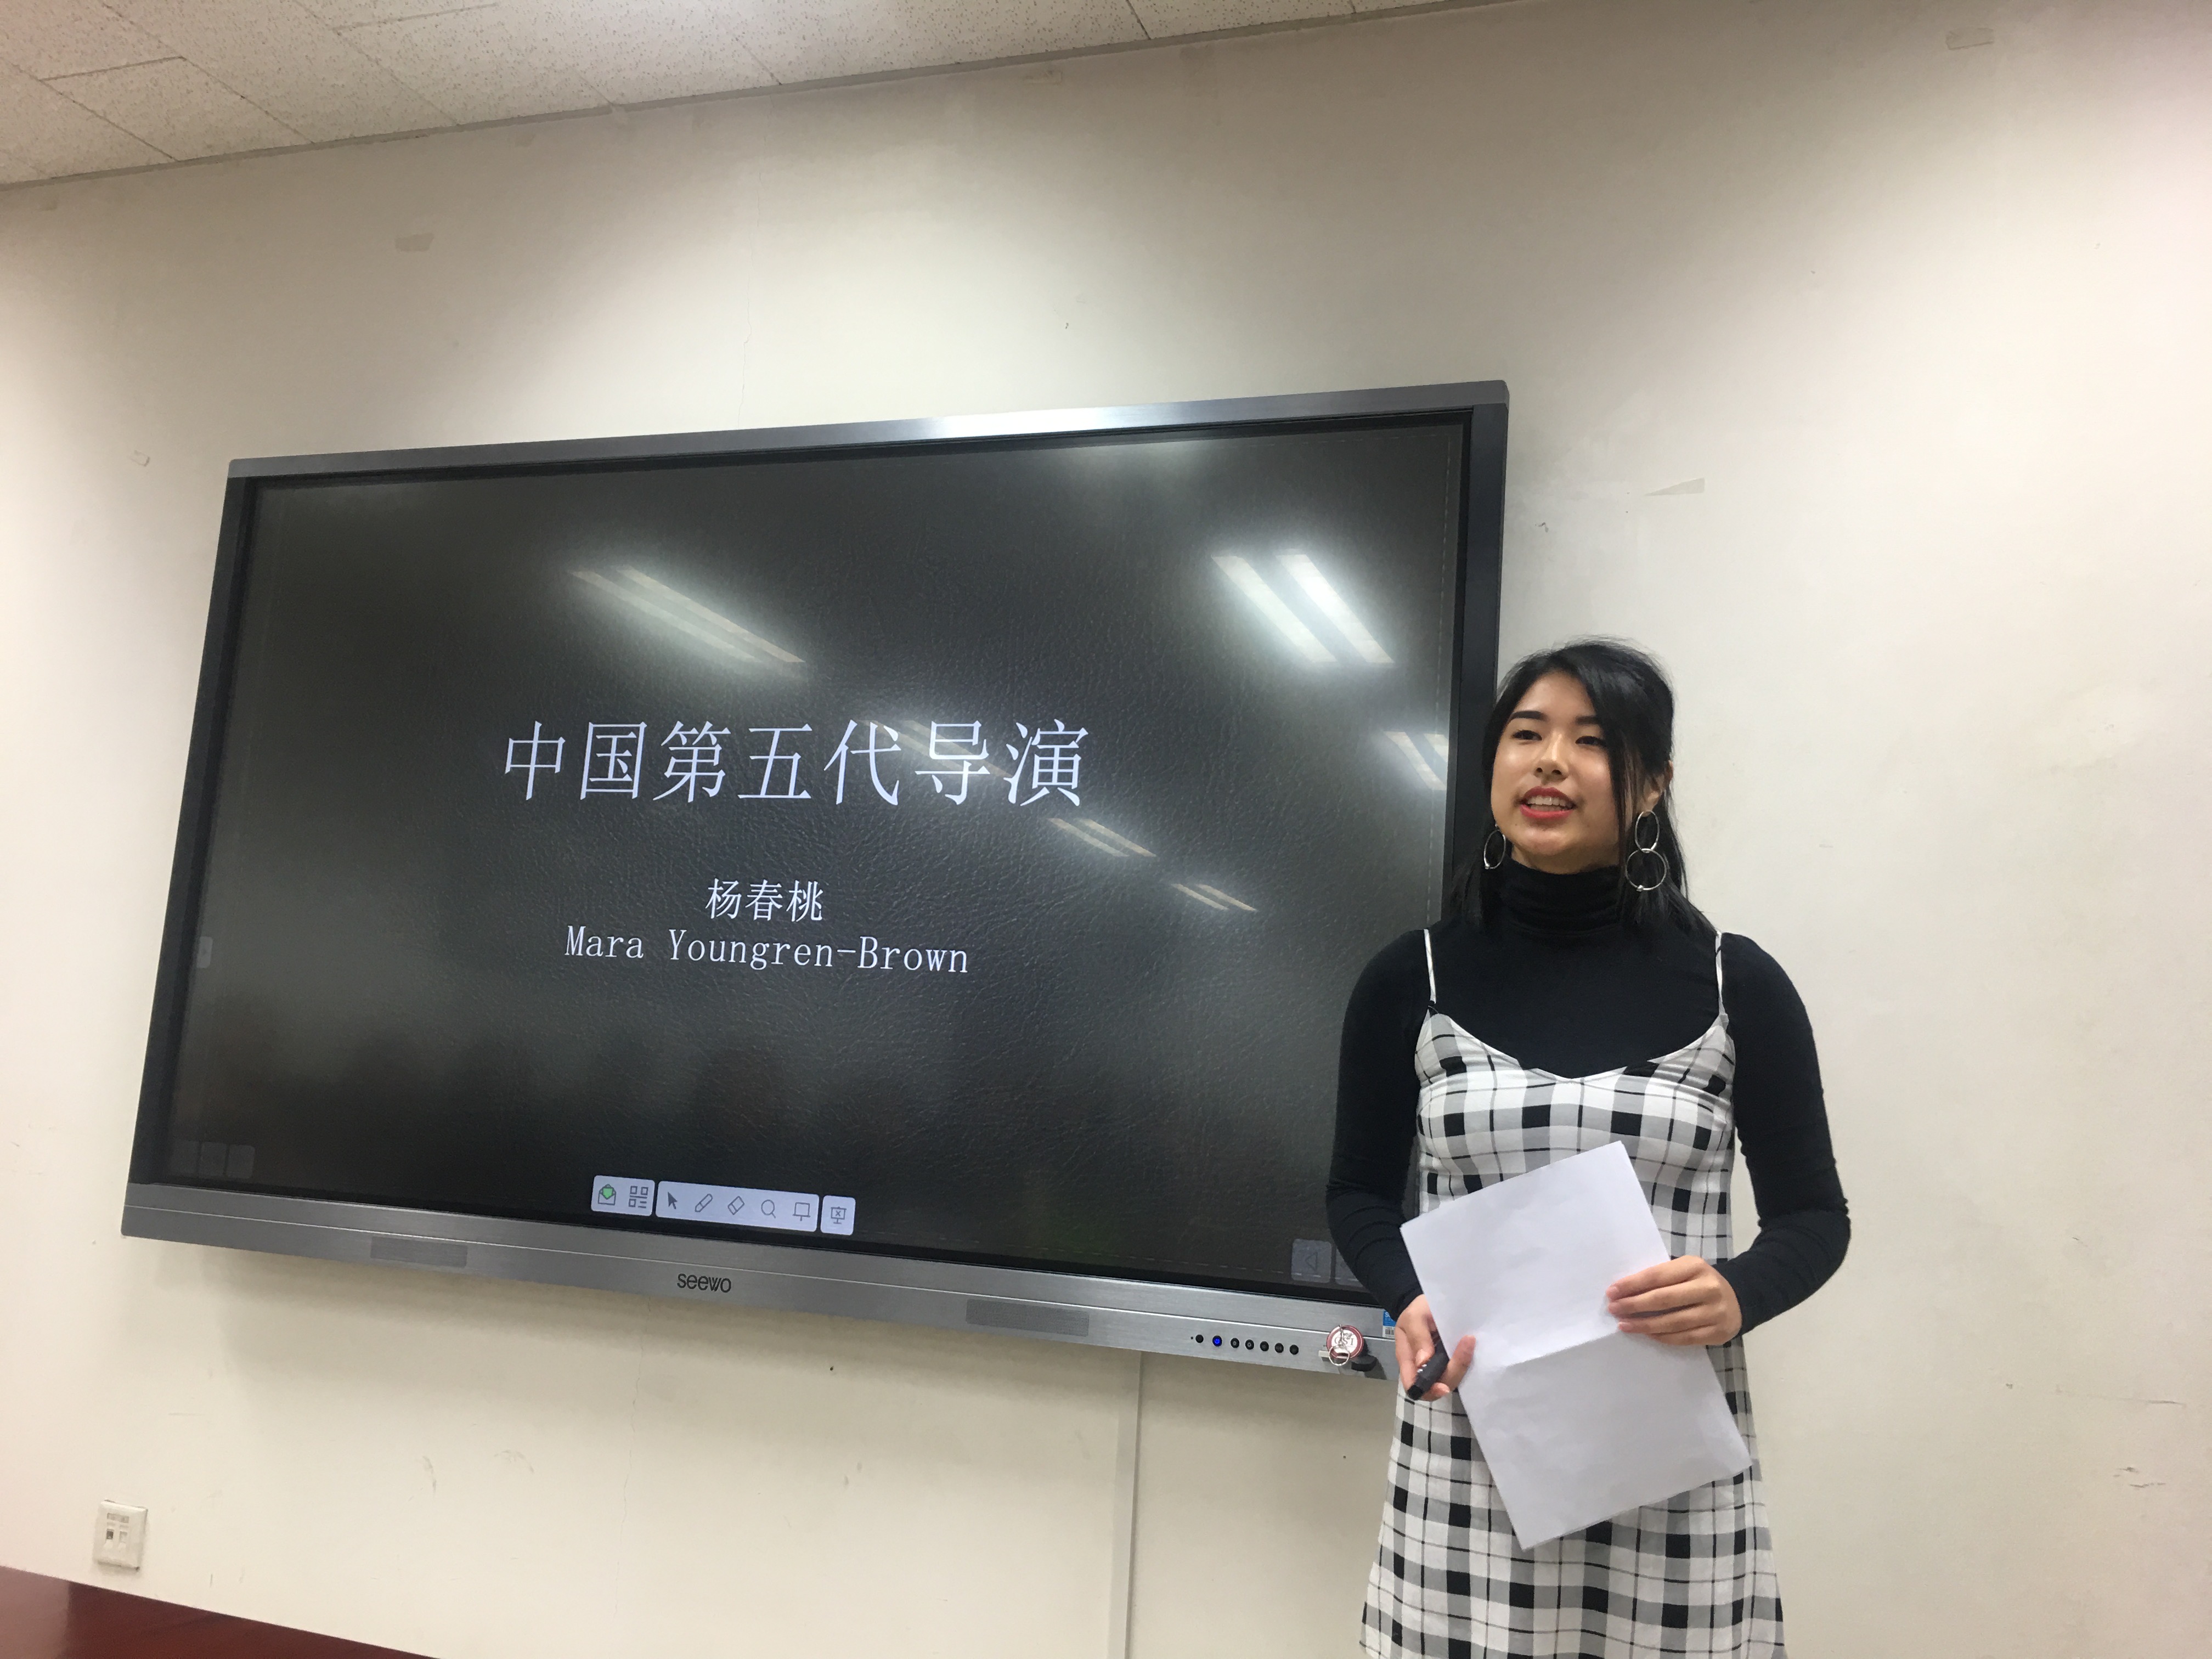 Me giving my presentation for the Chinese speaking contest